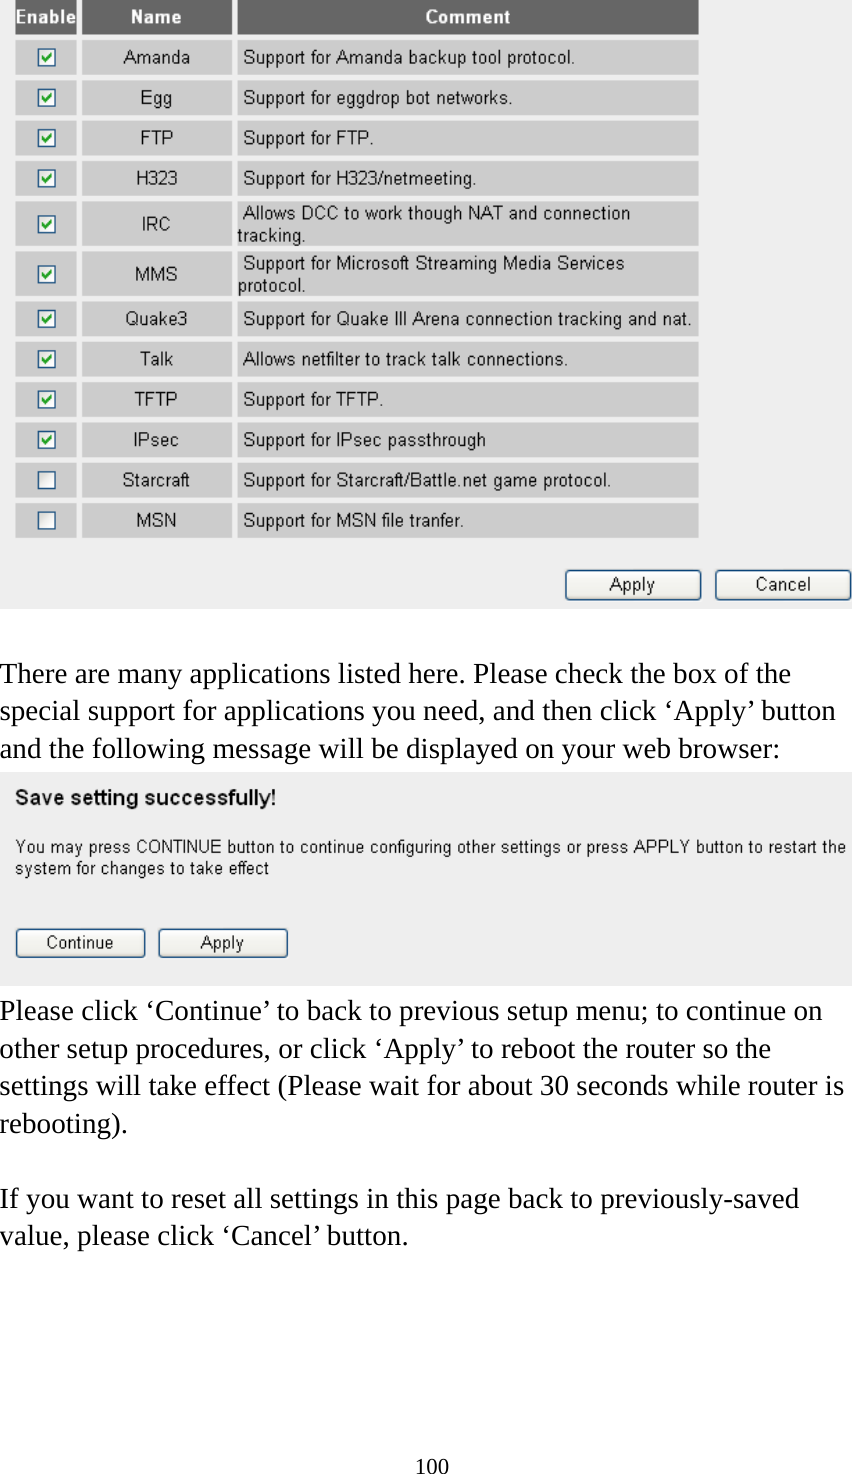 100   There are many applications listed here. Please check the box of the special support for applications you need, and then click ‘Apply’ button and the following message will be displayed on your web browser:  Please click ‘Continue’ to back to previous setup menu; to continue on other setup procedures, or click ‘Apply’ to reboot the router so the settings will take effect (Please wait for about 30 seconds while router is rebooting).  If you want to reset all settings in this page back to previously-saved value, please click ‘Cancel’ button.   